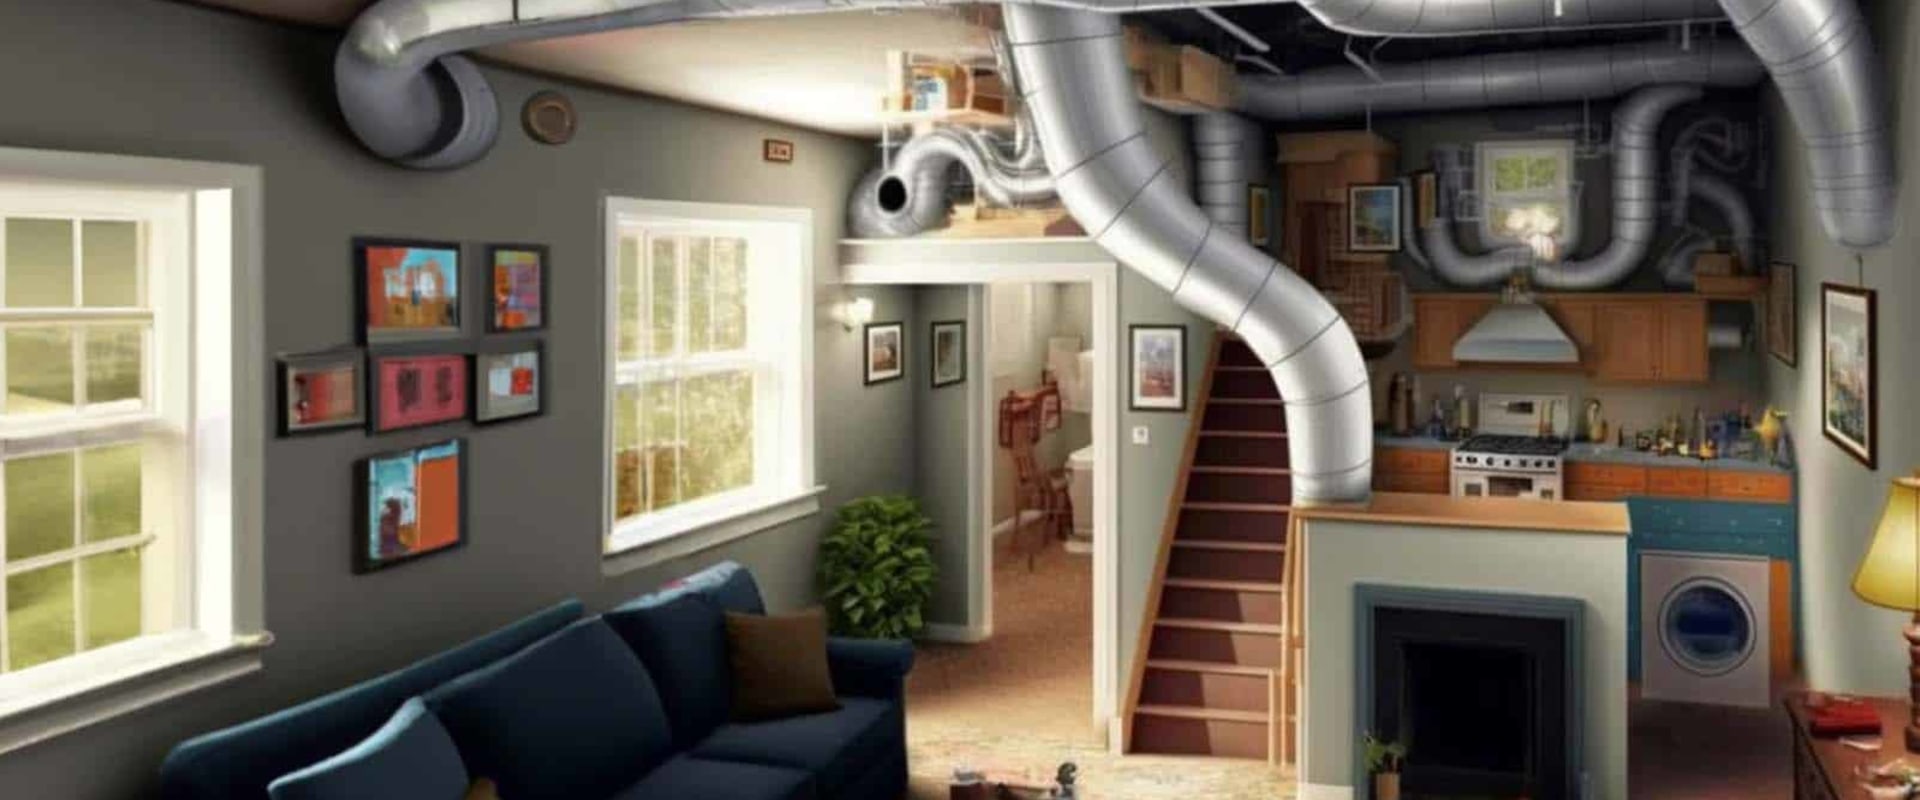 Air Duct Sealing in West Palm Beach: Local Regulations to Follow